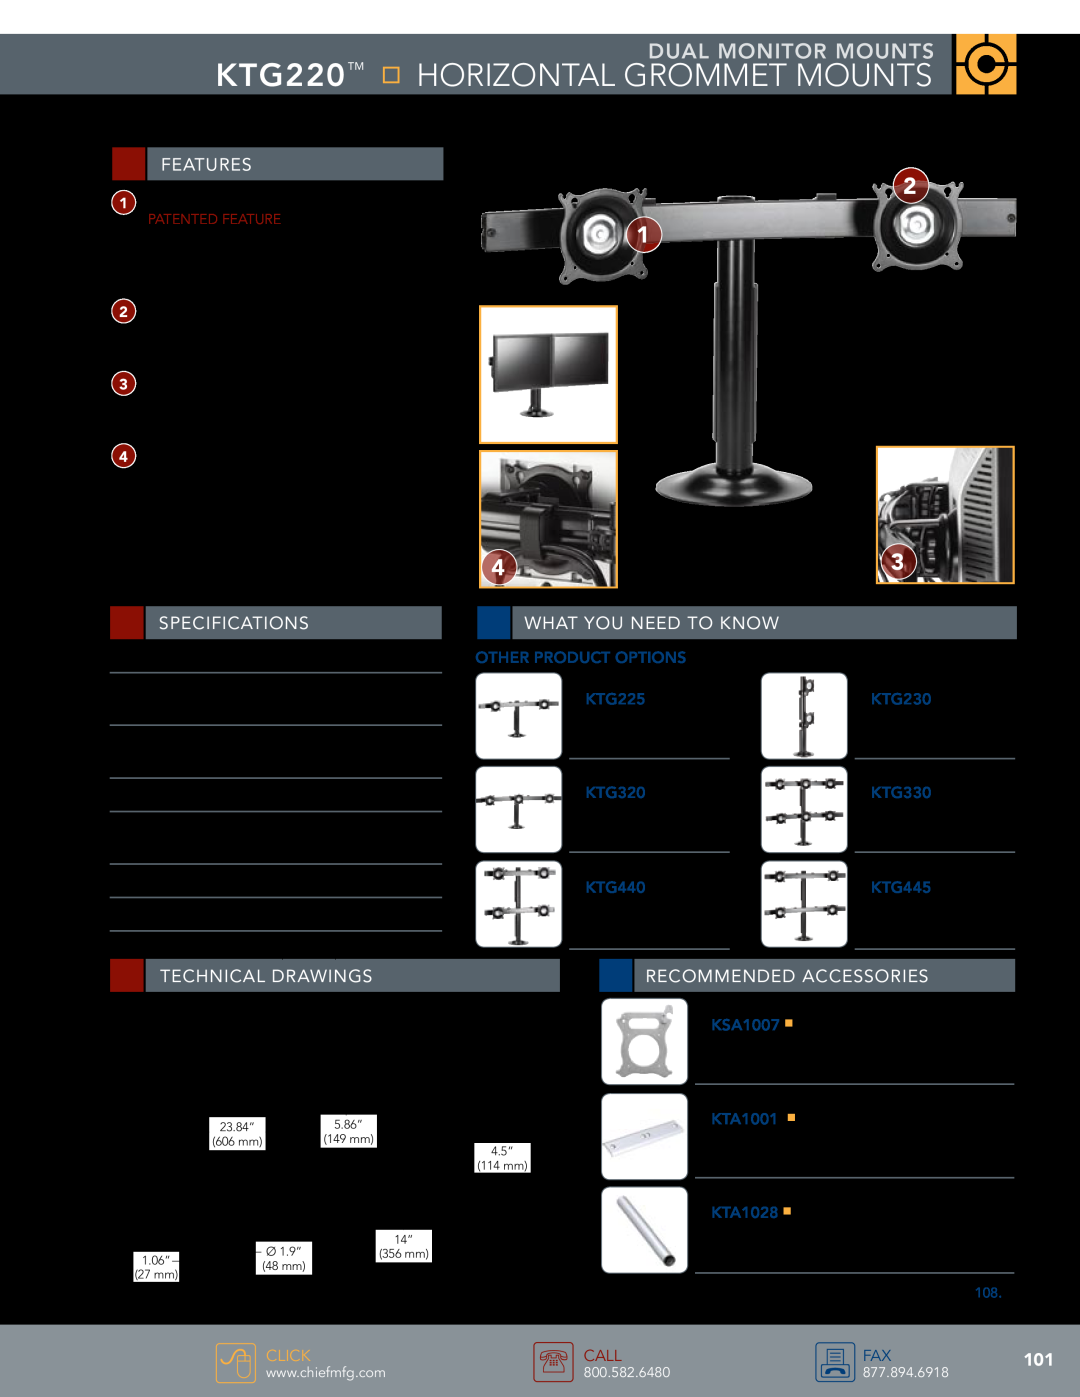 Chief Manufacturing specifications KTG220 HOrizontal Grommet Mounts, Dual Monitor mounts, Features, Specifications 